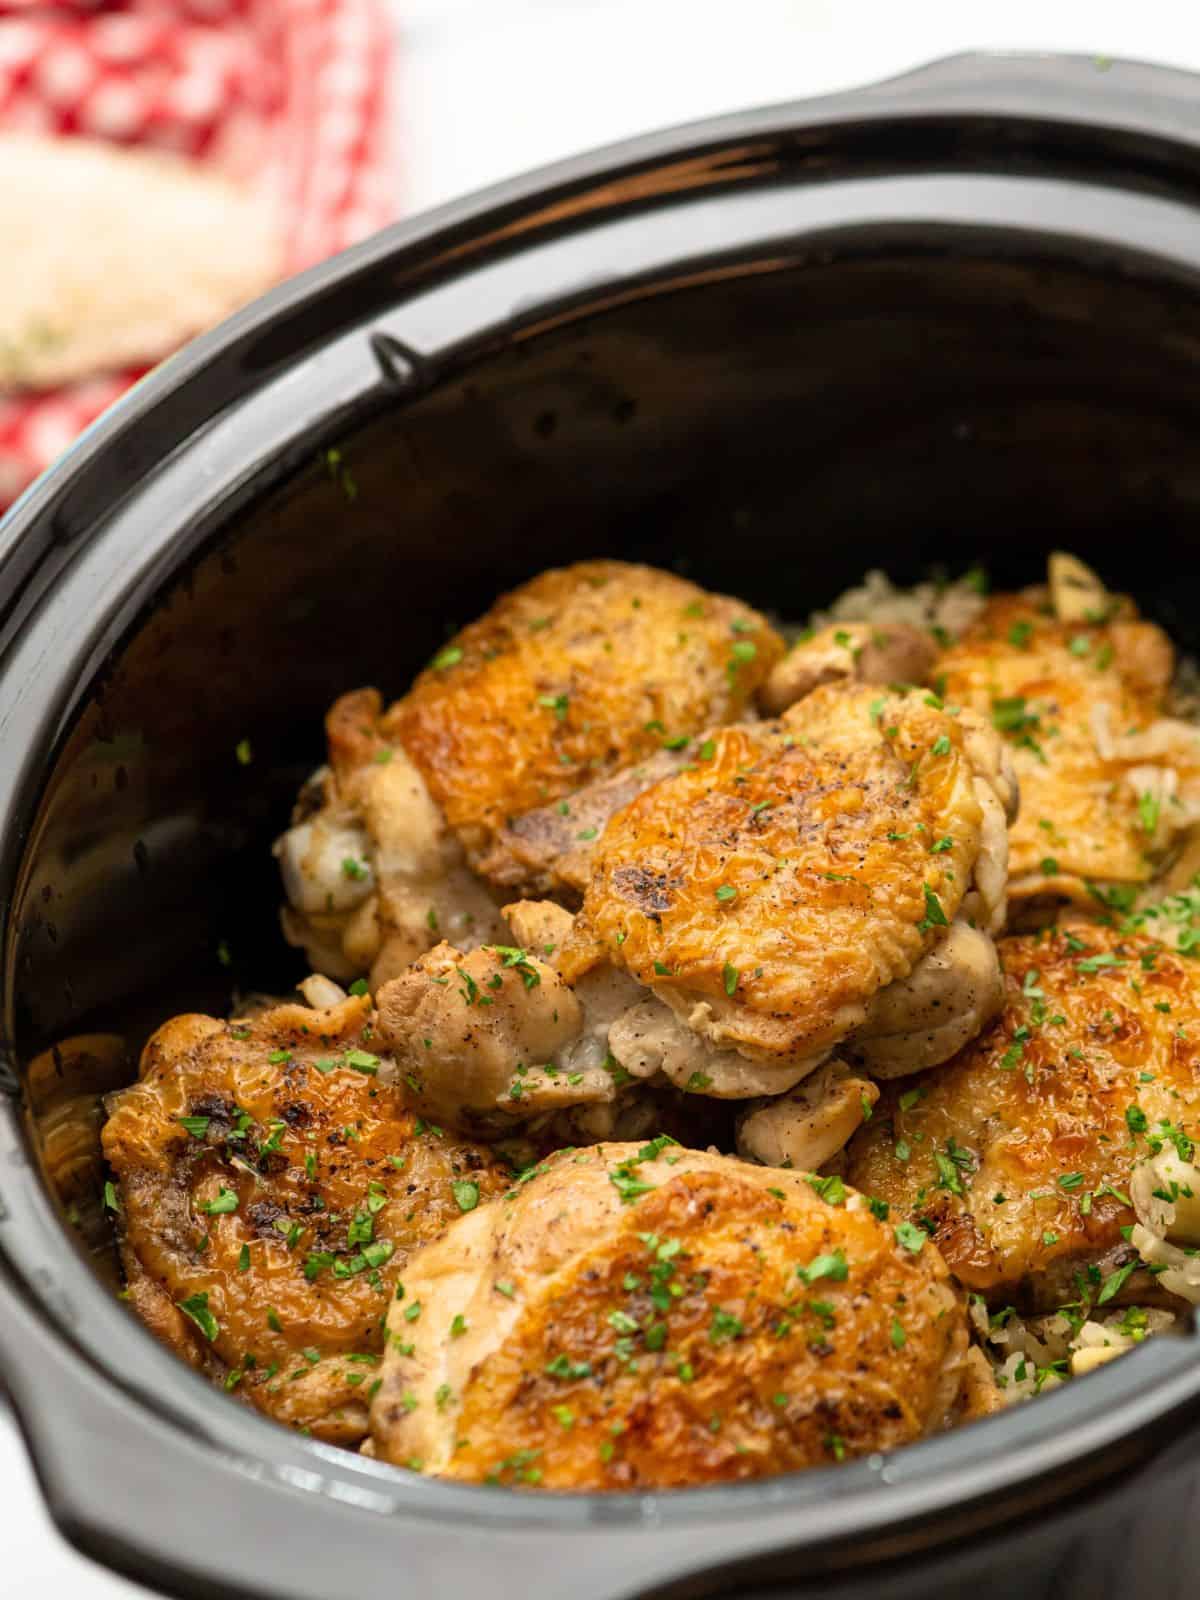 Crockpot with cooked rice and seared chicken thighs.